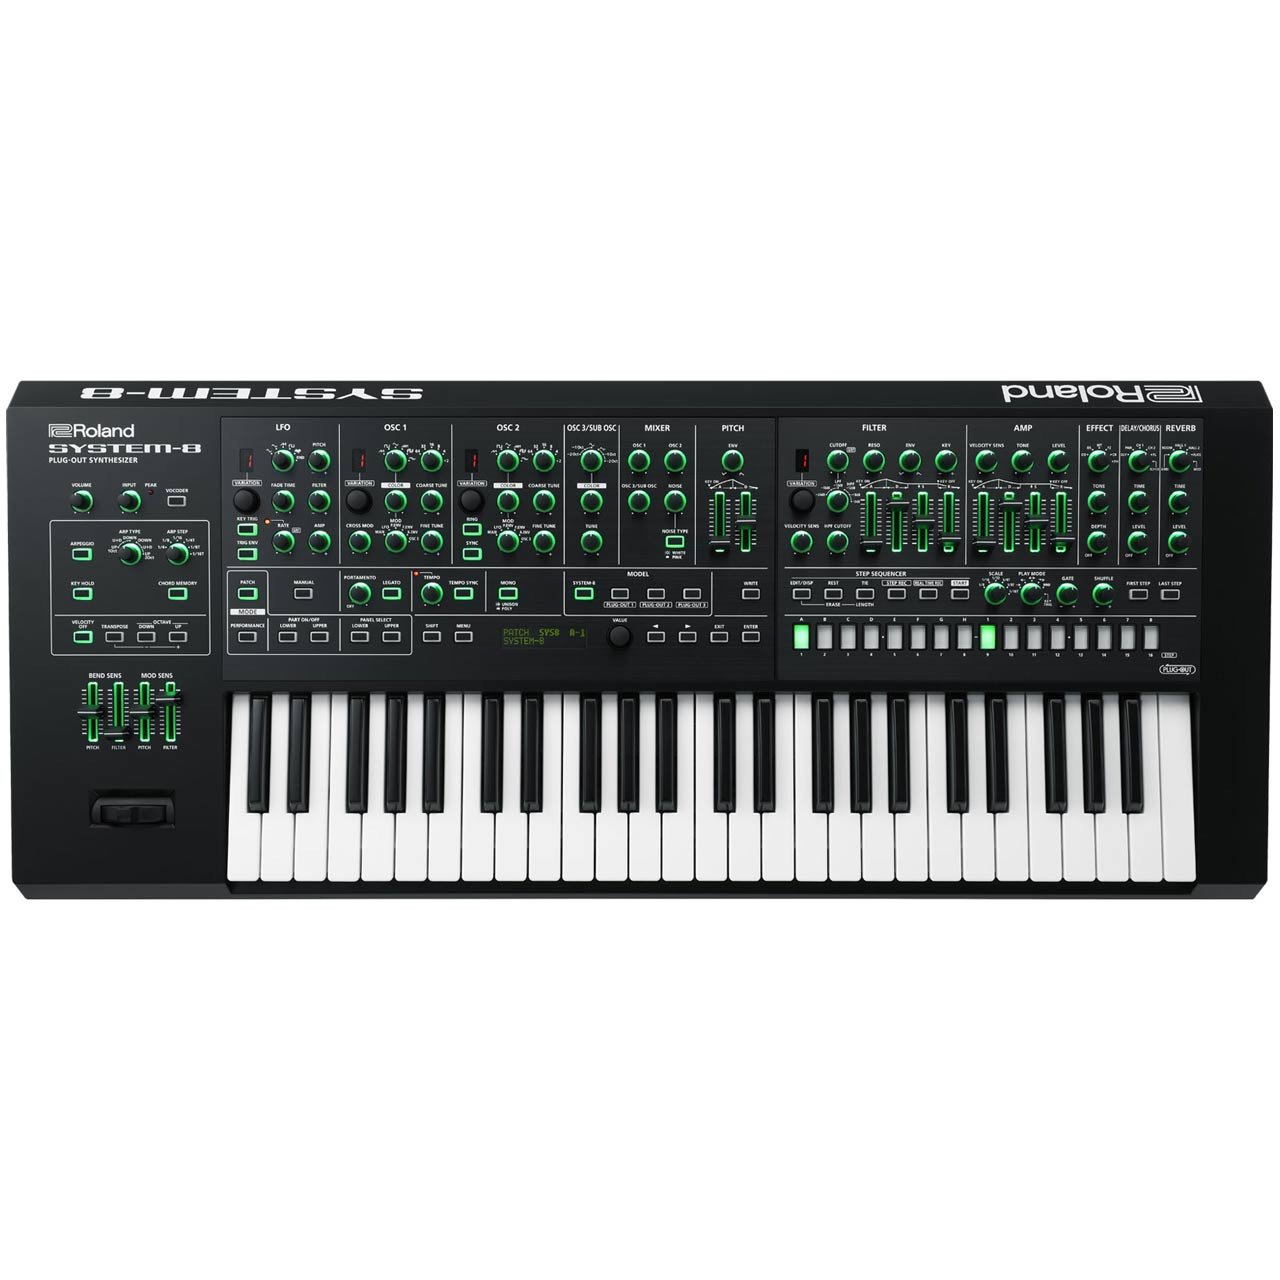 Keyboard Synthesizers - Roland System-8 Plug-Out Synthesizer